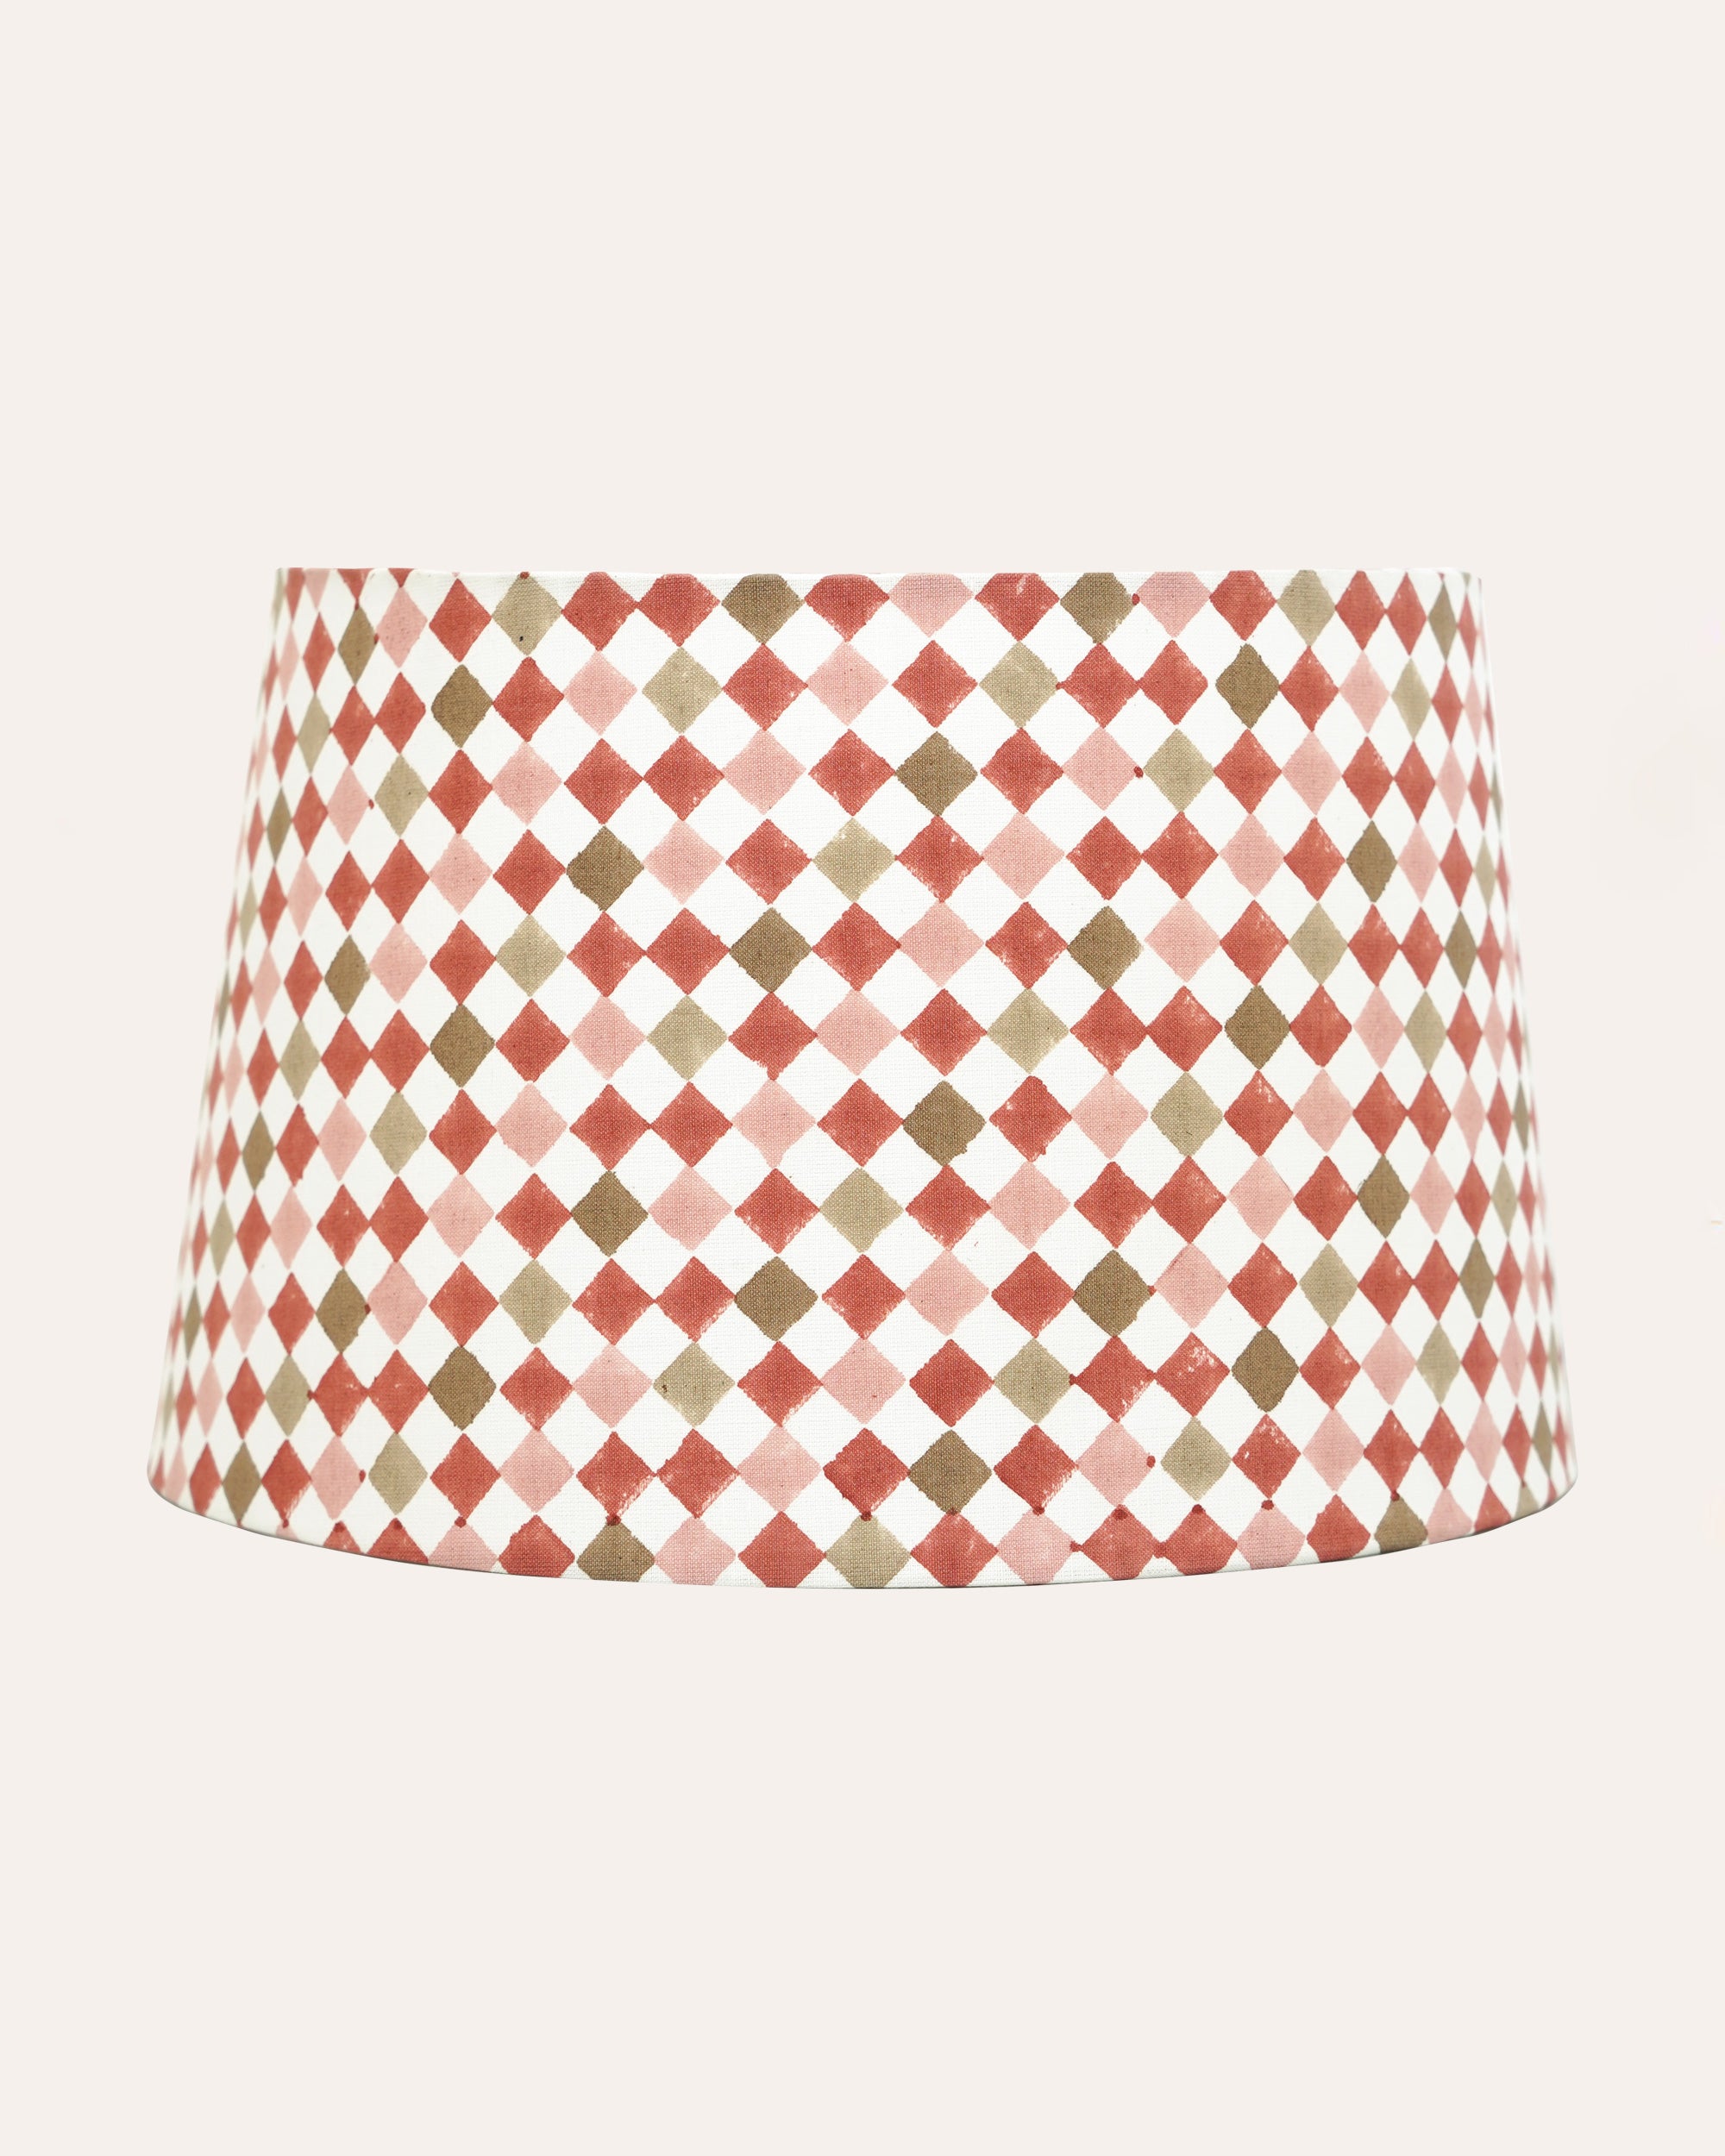 Azulejo Block Print Lampshade - Red and Taupe